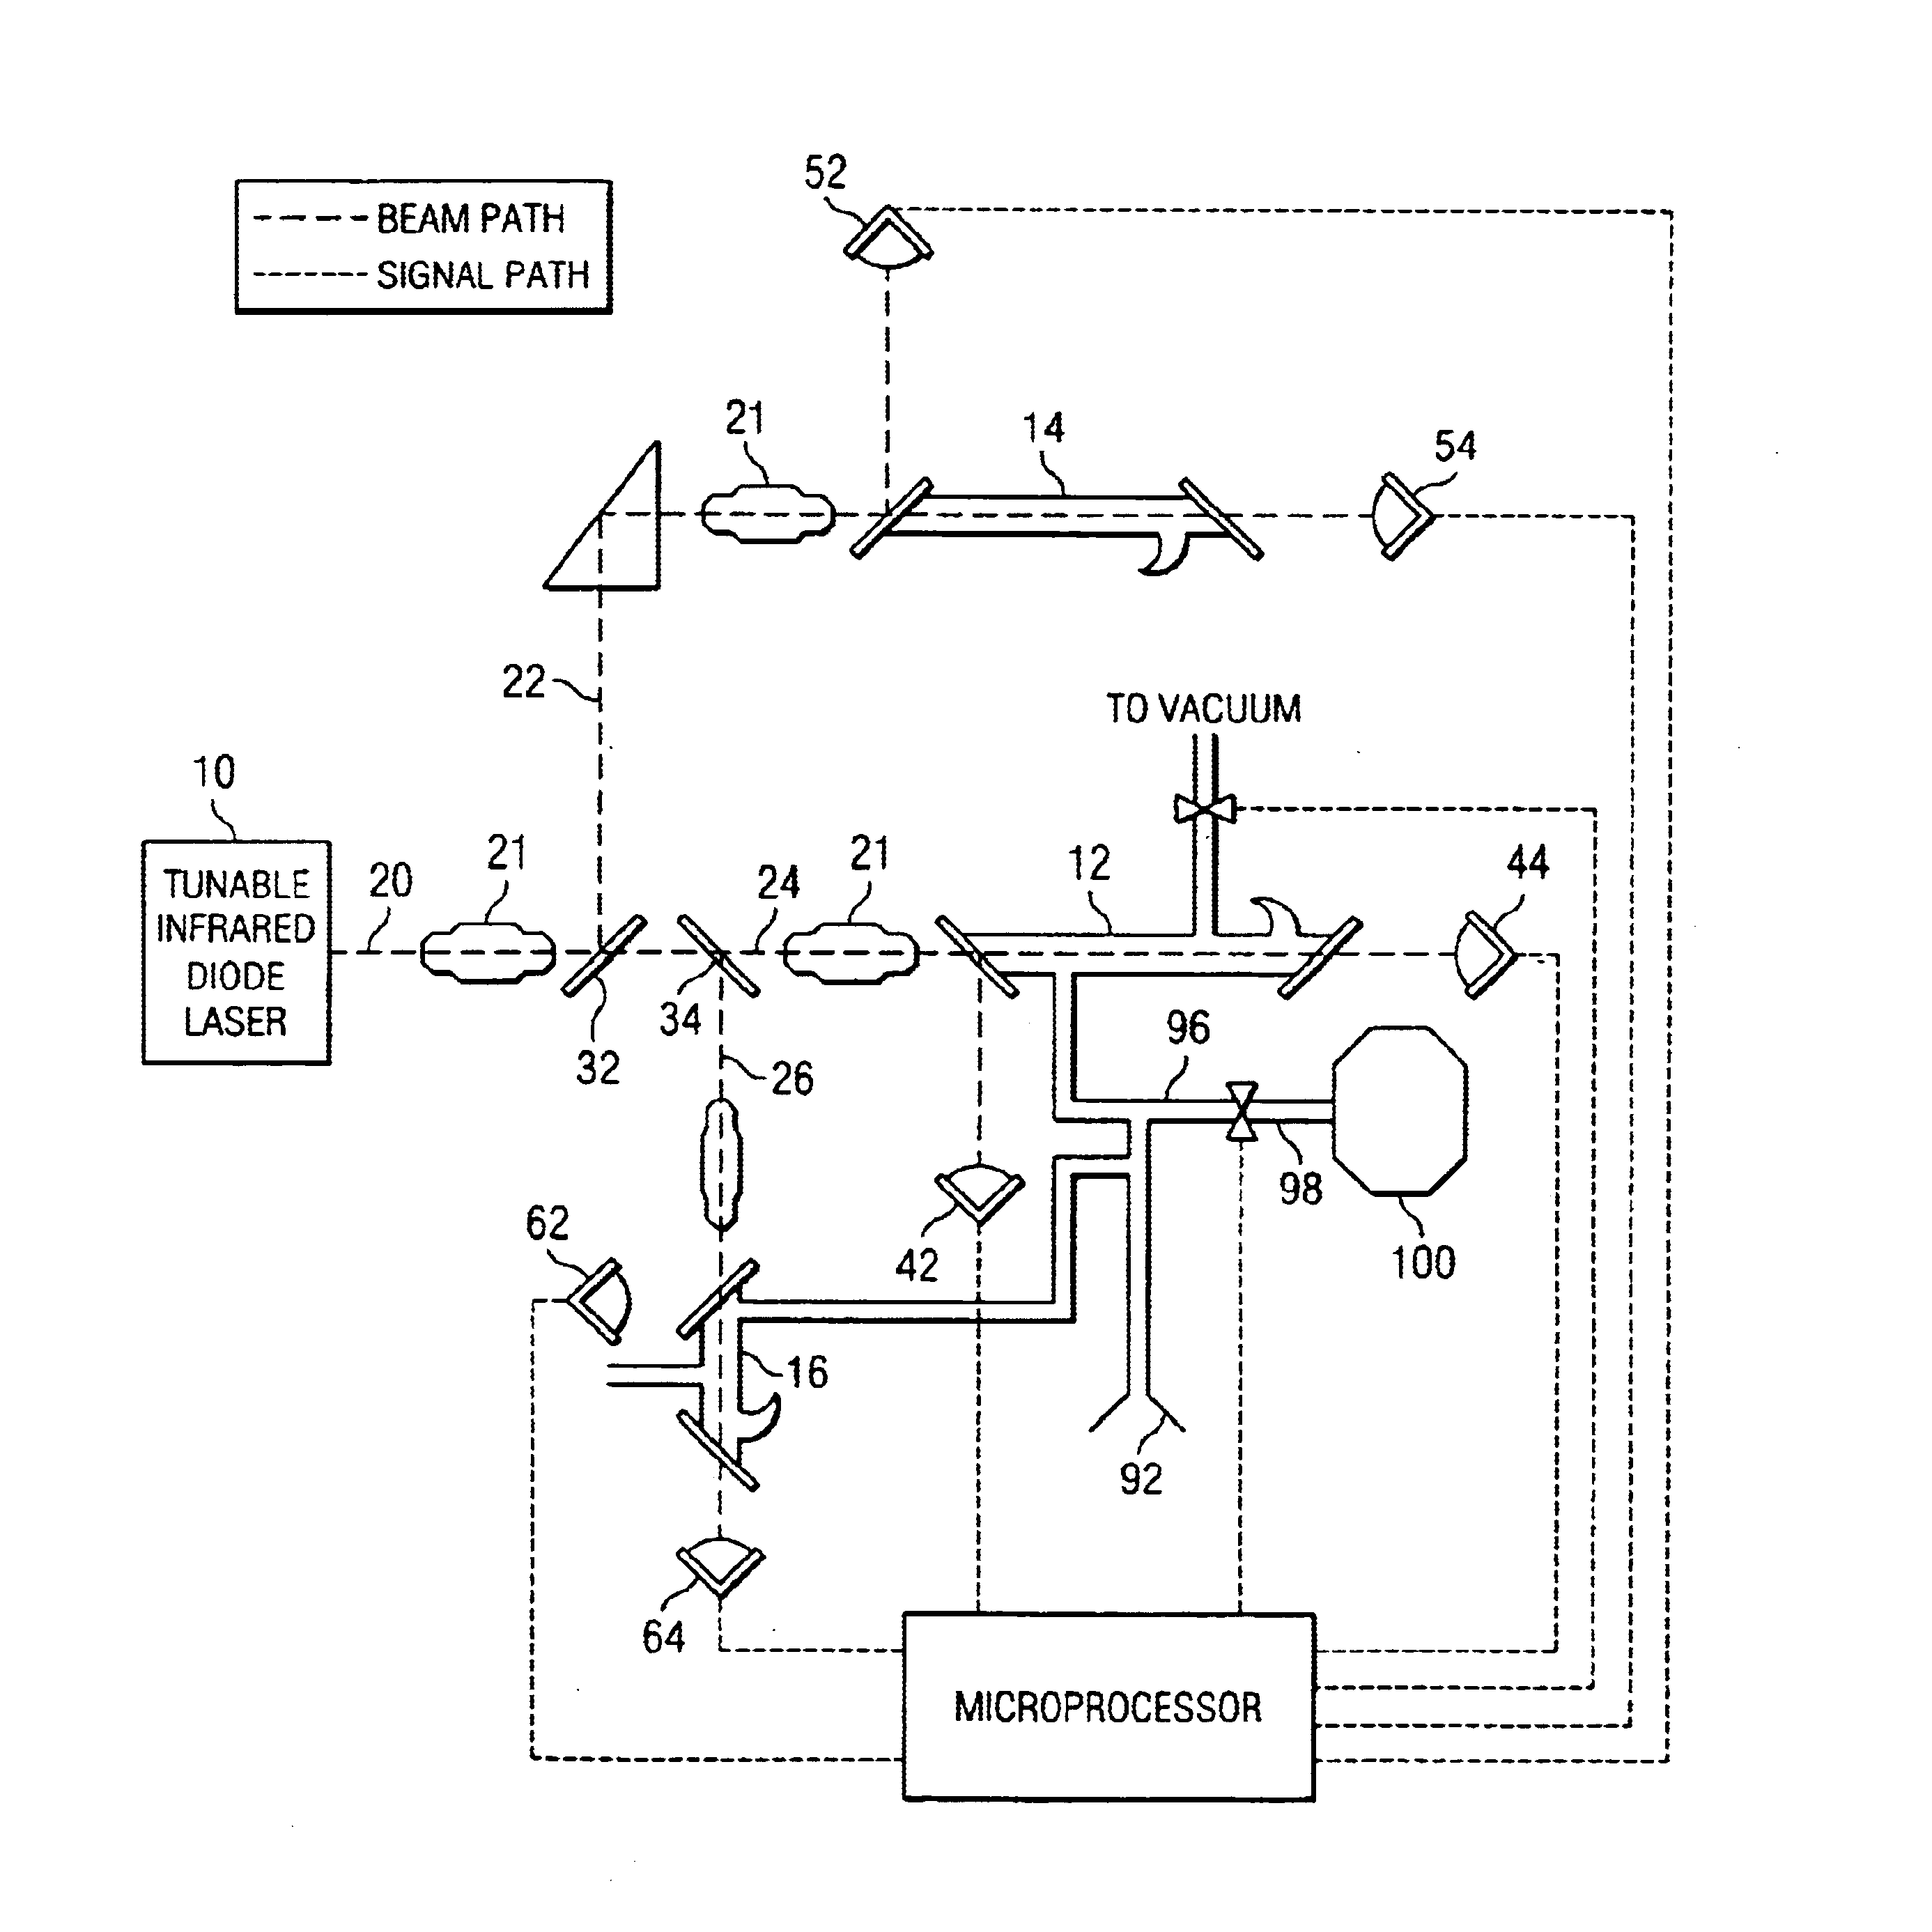 Method and apparatus for performing rapid isotopic analysis via laser spectroscopy